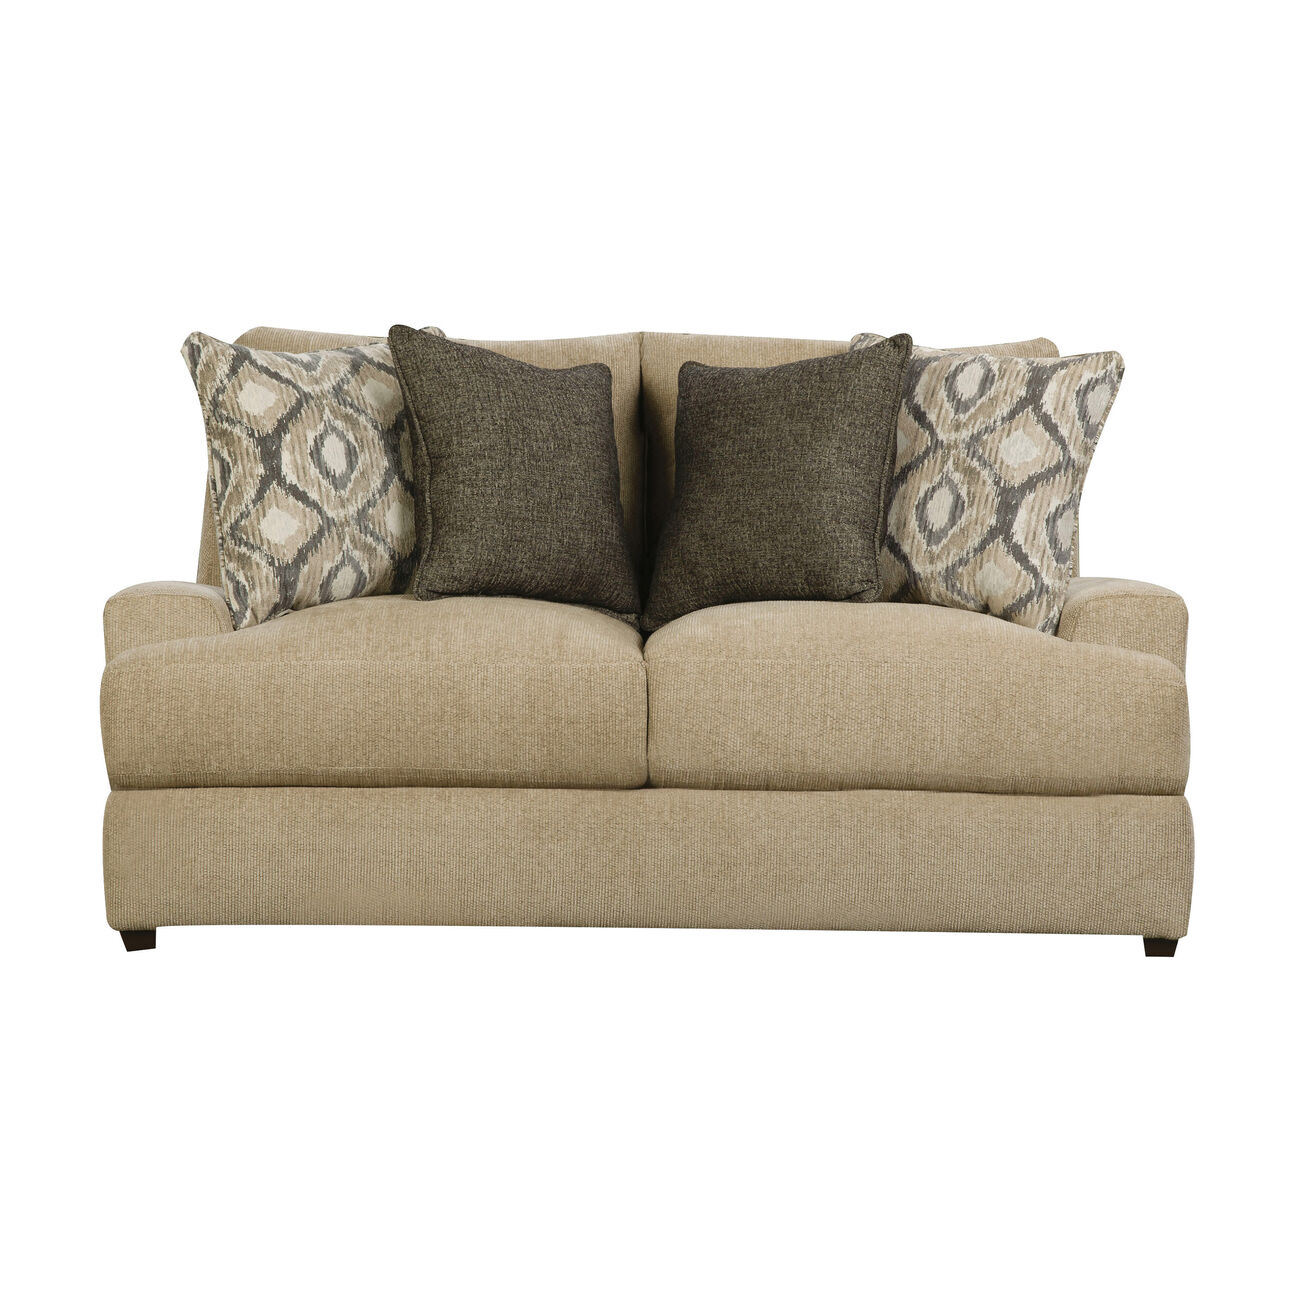 Chenille Fabric Upholstered Loveseat with Tapered Legs, Brown